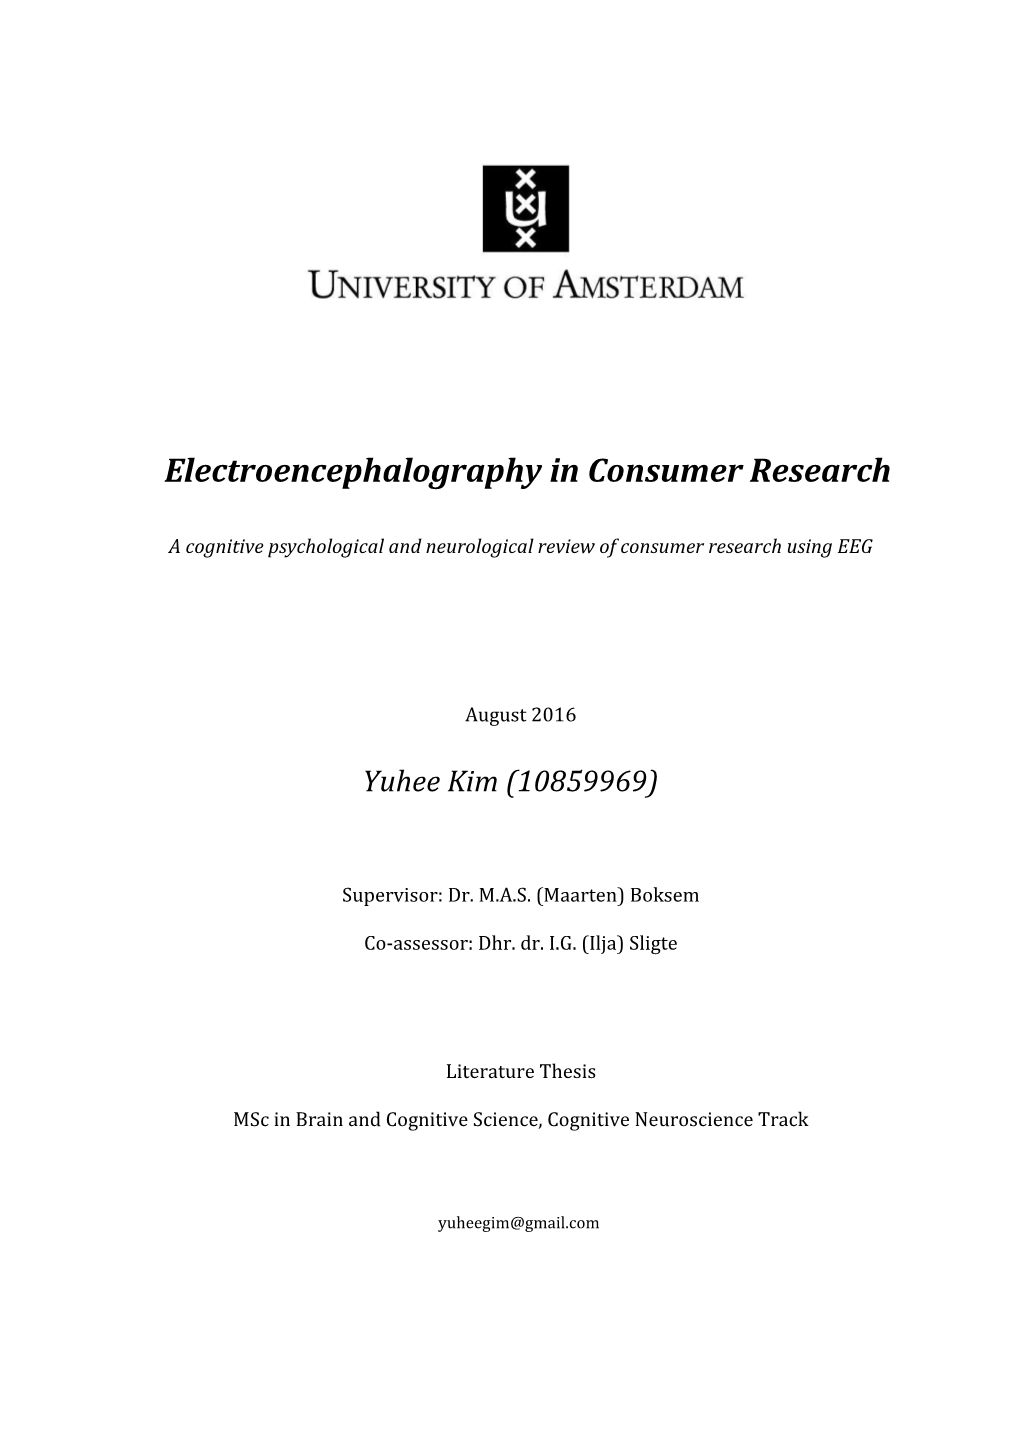 Electroencephalography in Consumer Research